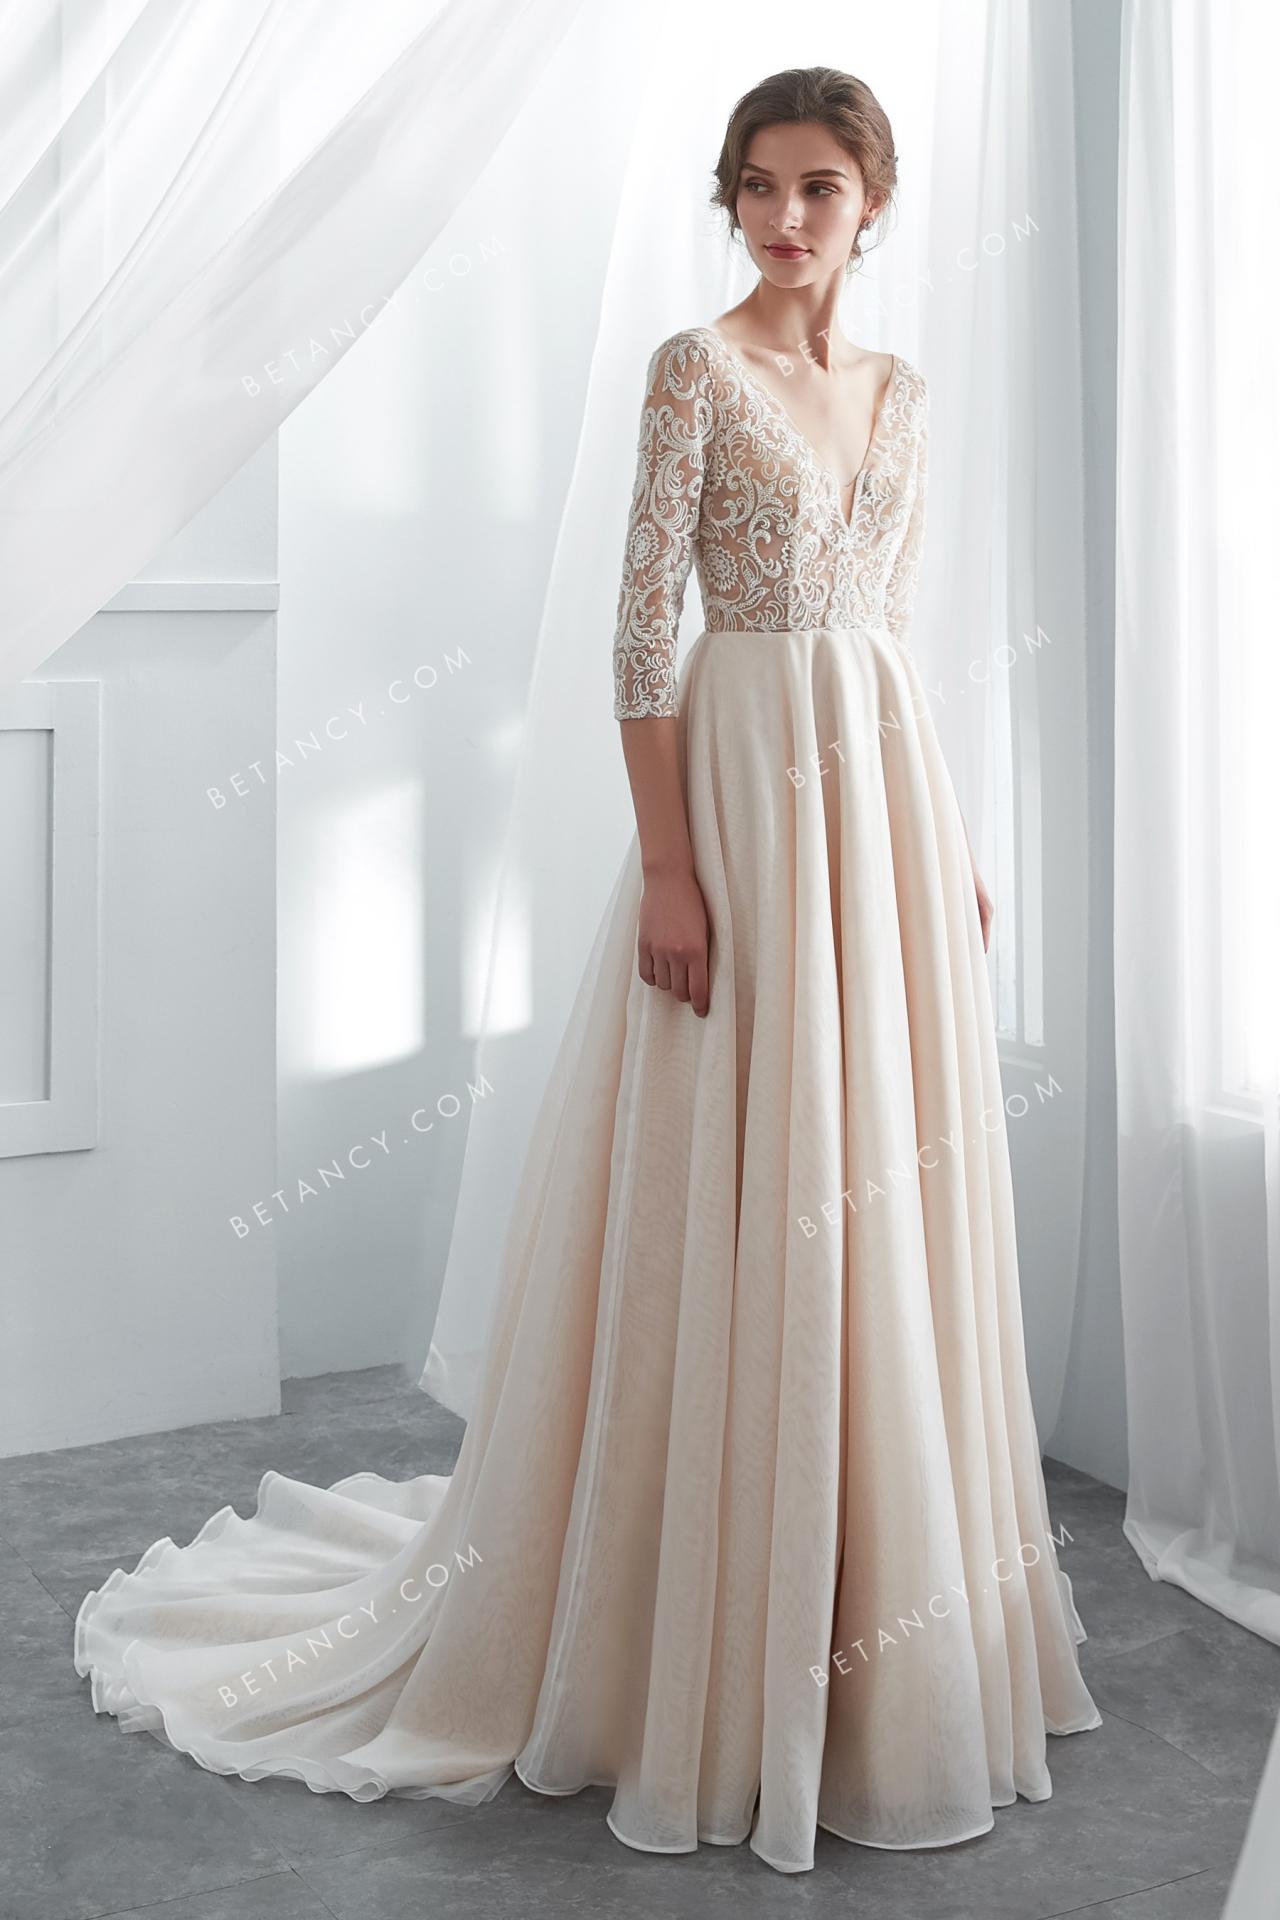 Champagne lace and organza chic wedding dress 1